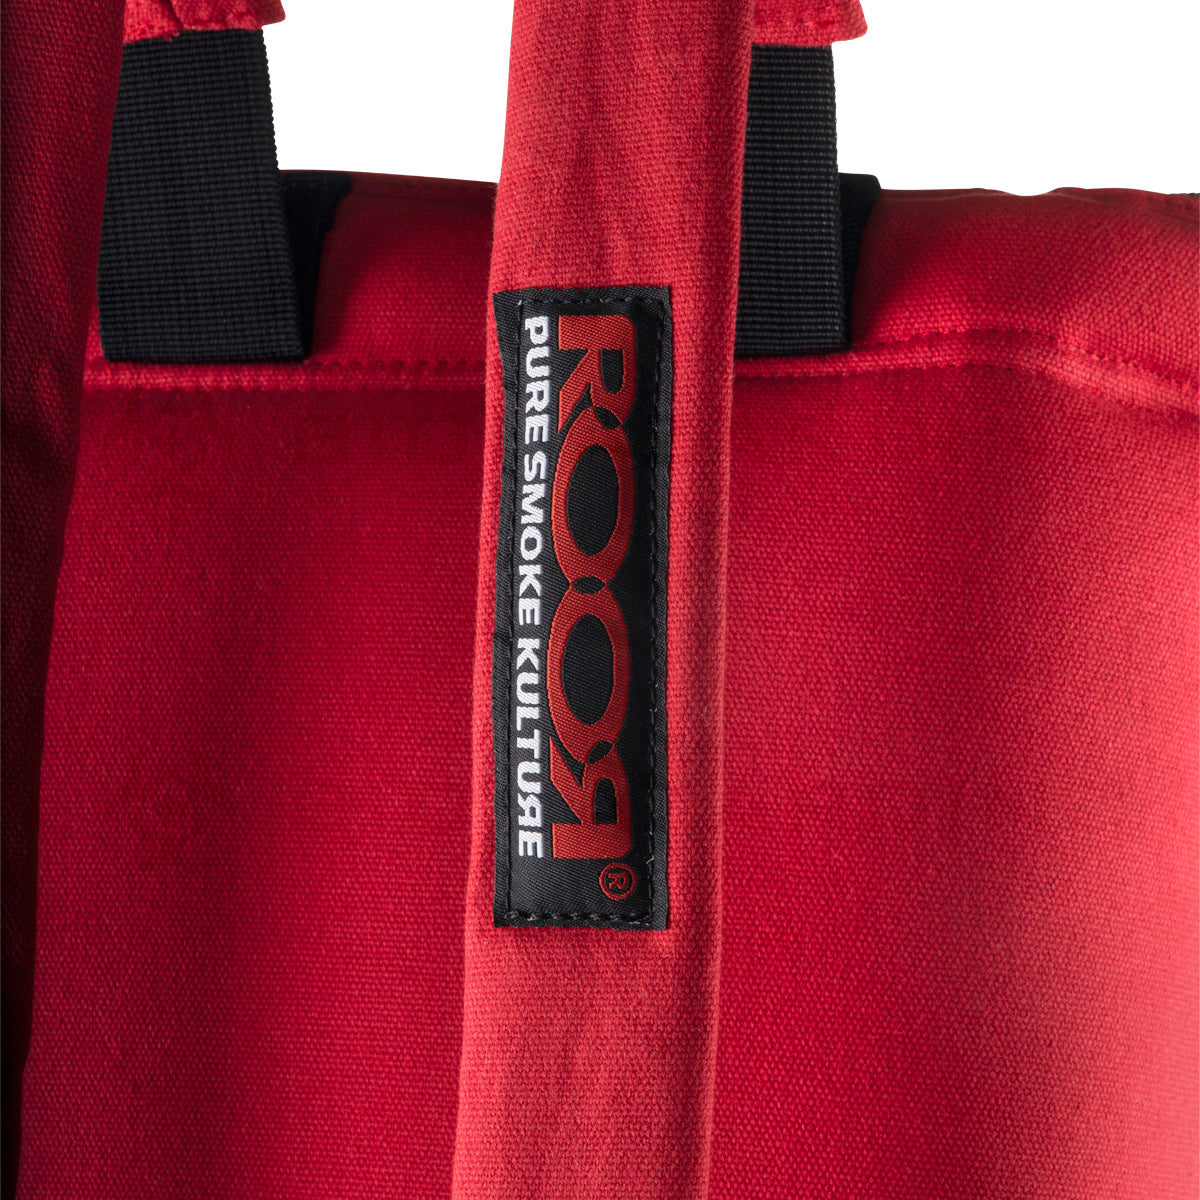 RooR® | Carrying Bag | 24" Large - Red Smell Proof Bag Roor   